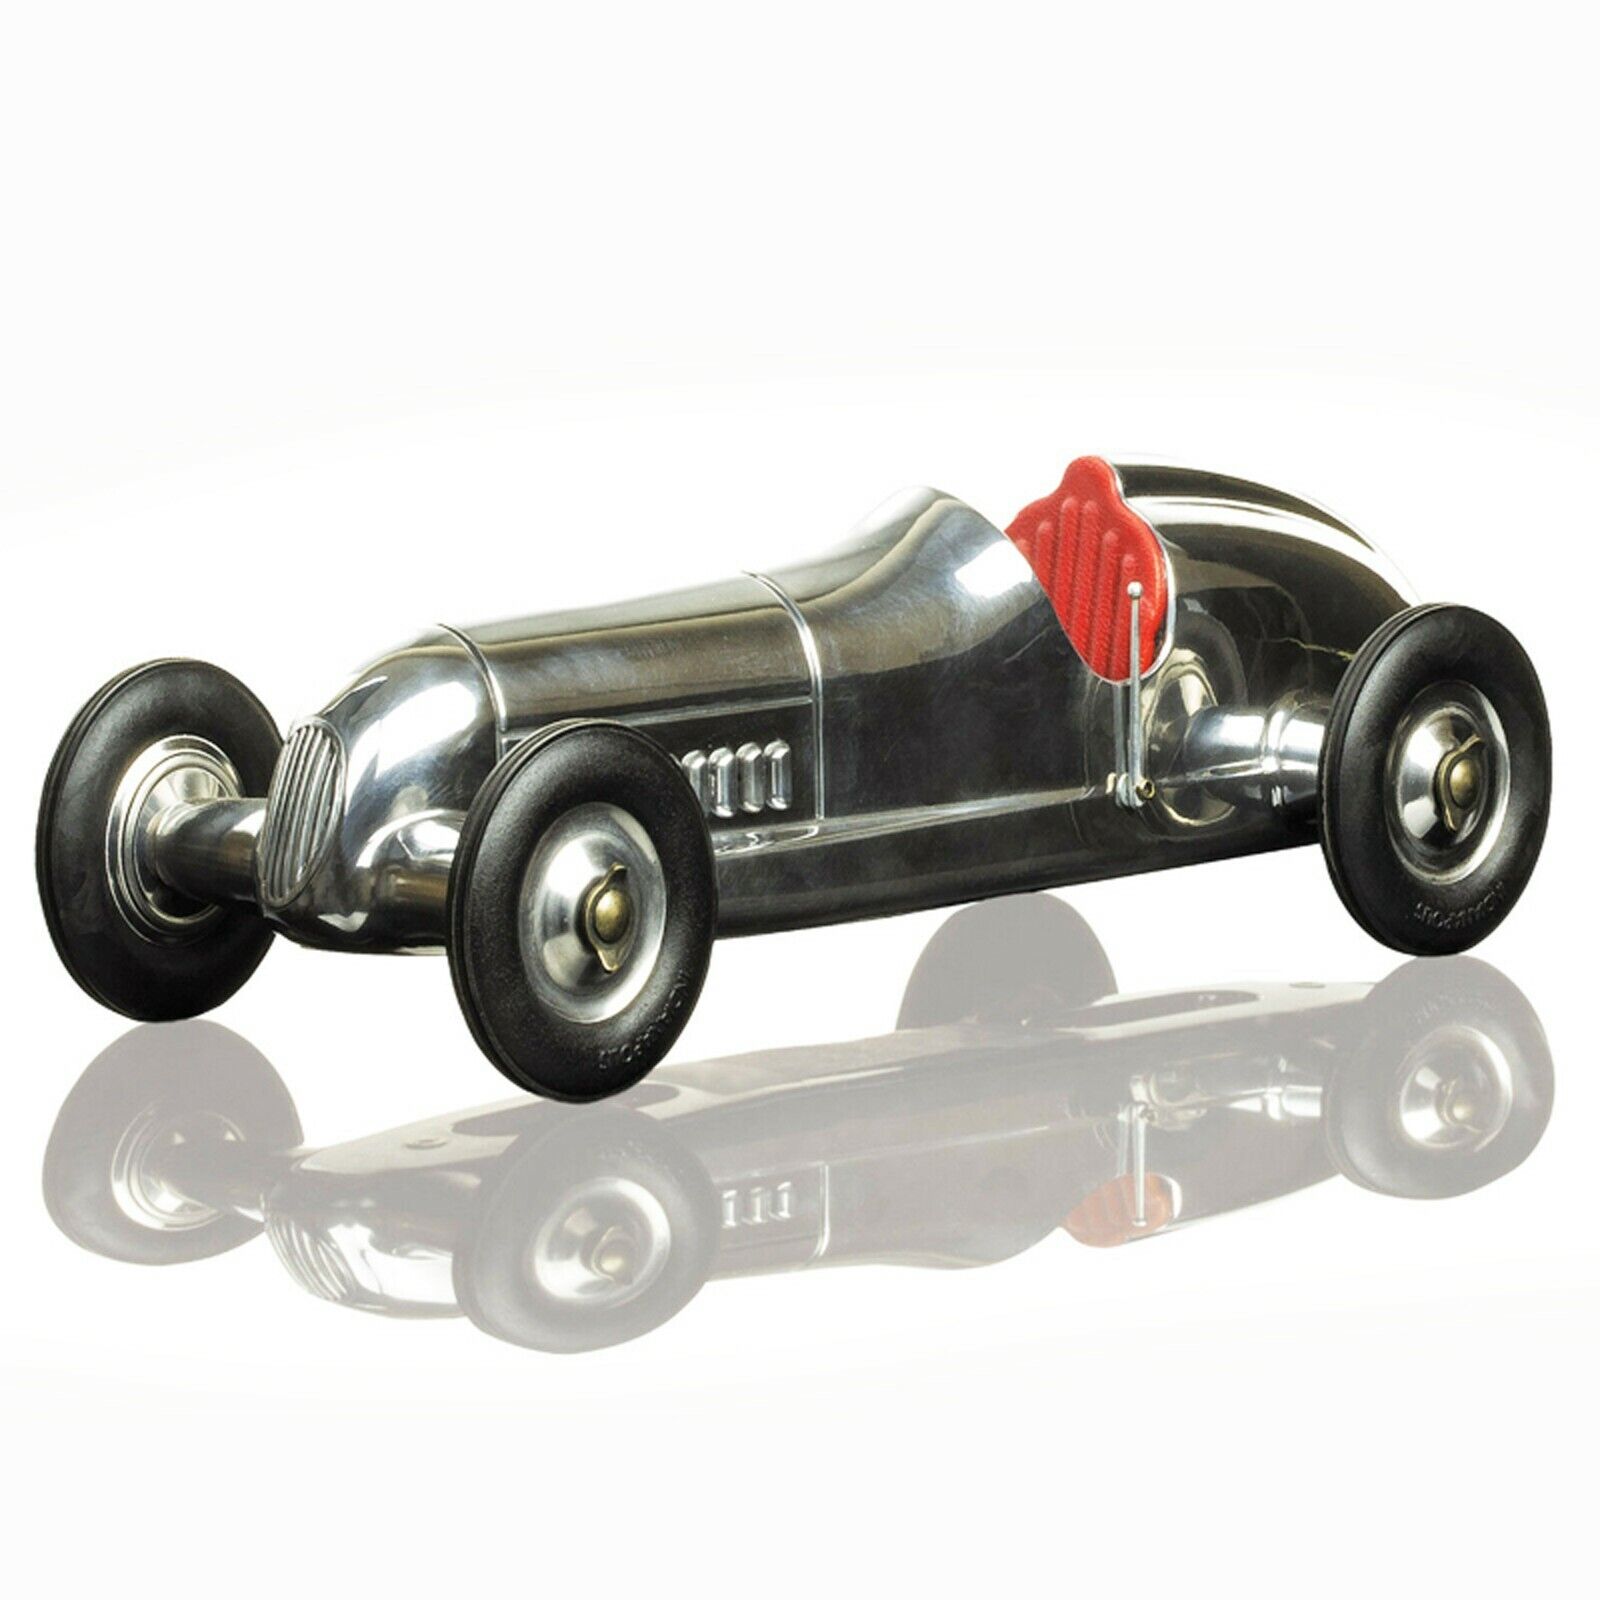 Indianapolis Champion Car Model Vintage Race Replica Spindizzy 1930s Tether 12\